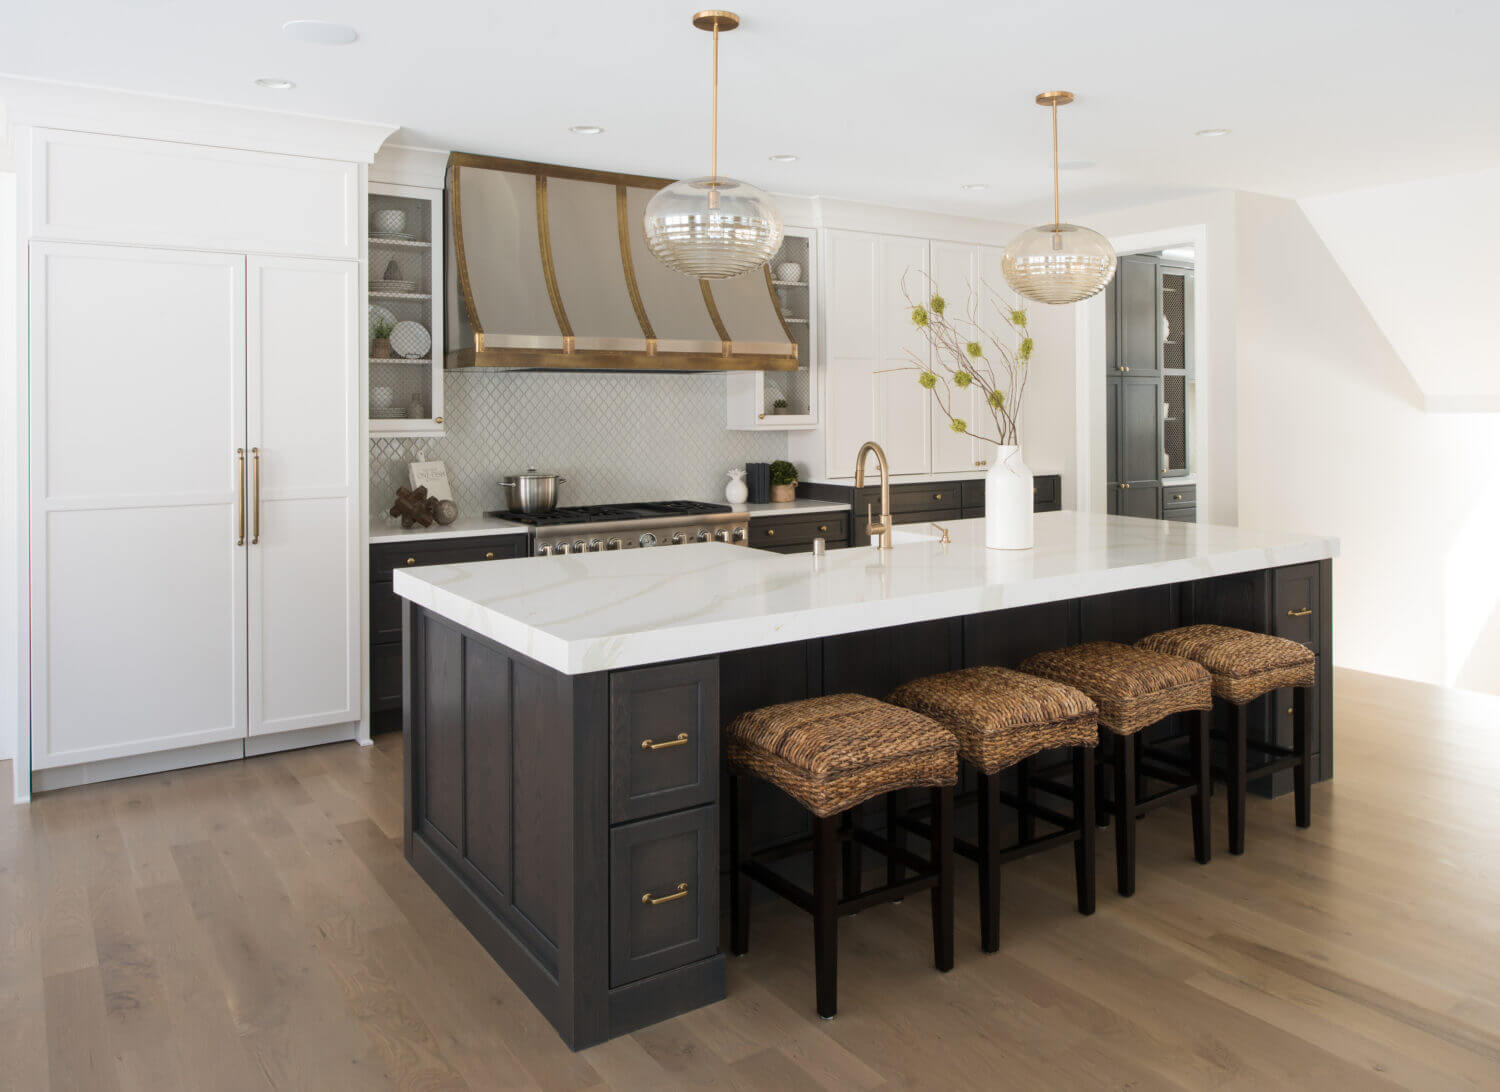 The cabinetry in this kitchen showcases Dura Supreme’s Kendall Panel flat panel door style in “Linen White” paint on the perimeter and the “Smoke” stained finish on Oak for the kitchen island, butler’s pantry, and lower base cabinets.